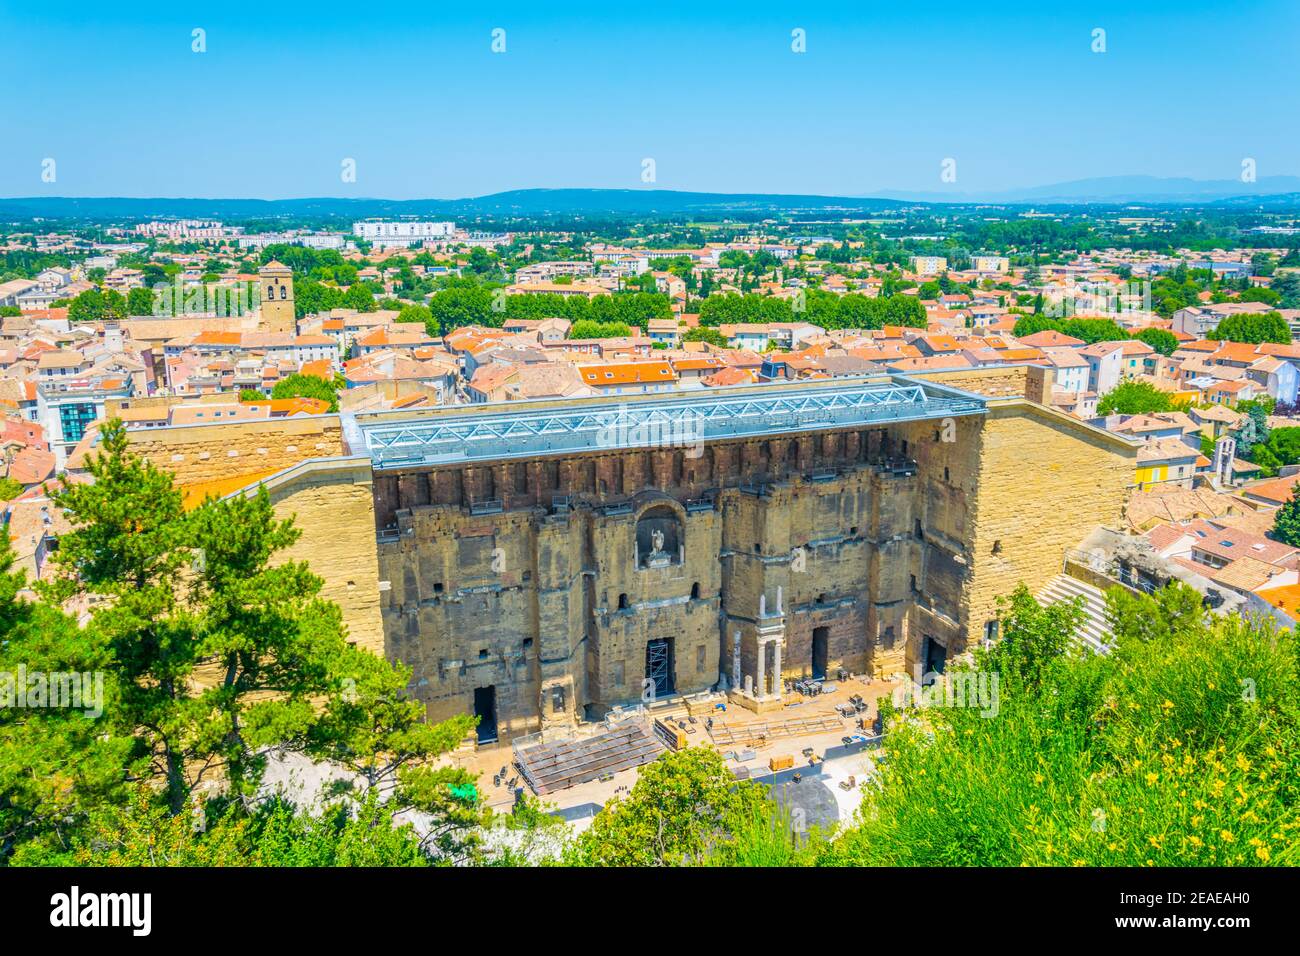 Aerial view of roman amphitheater in Orange, France Stock Photo